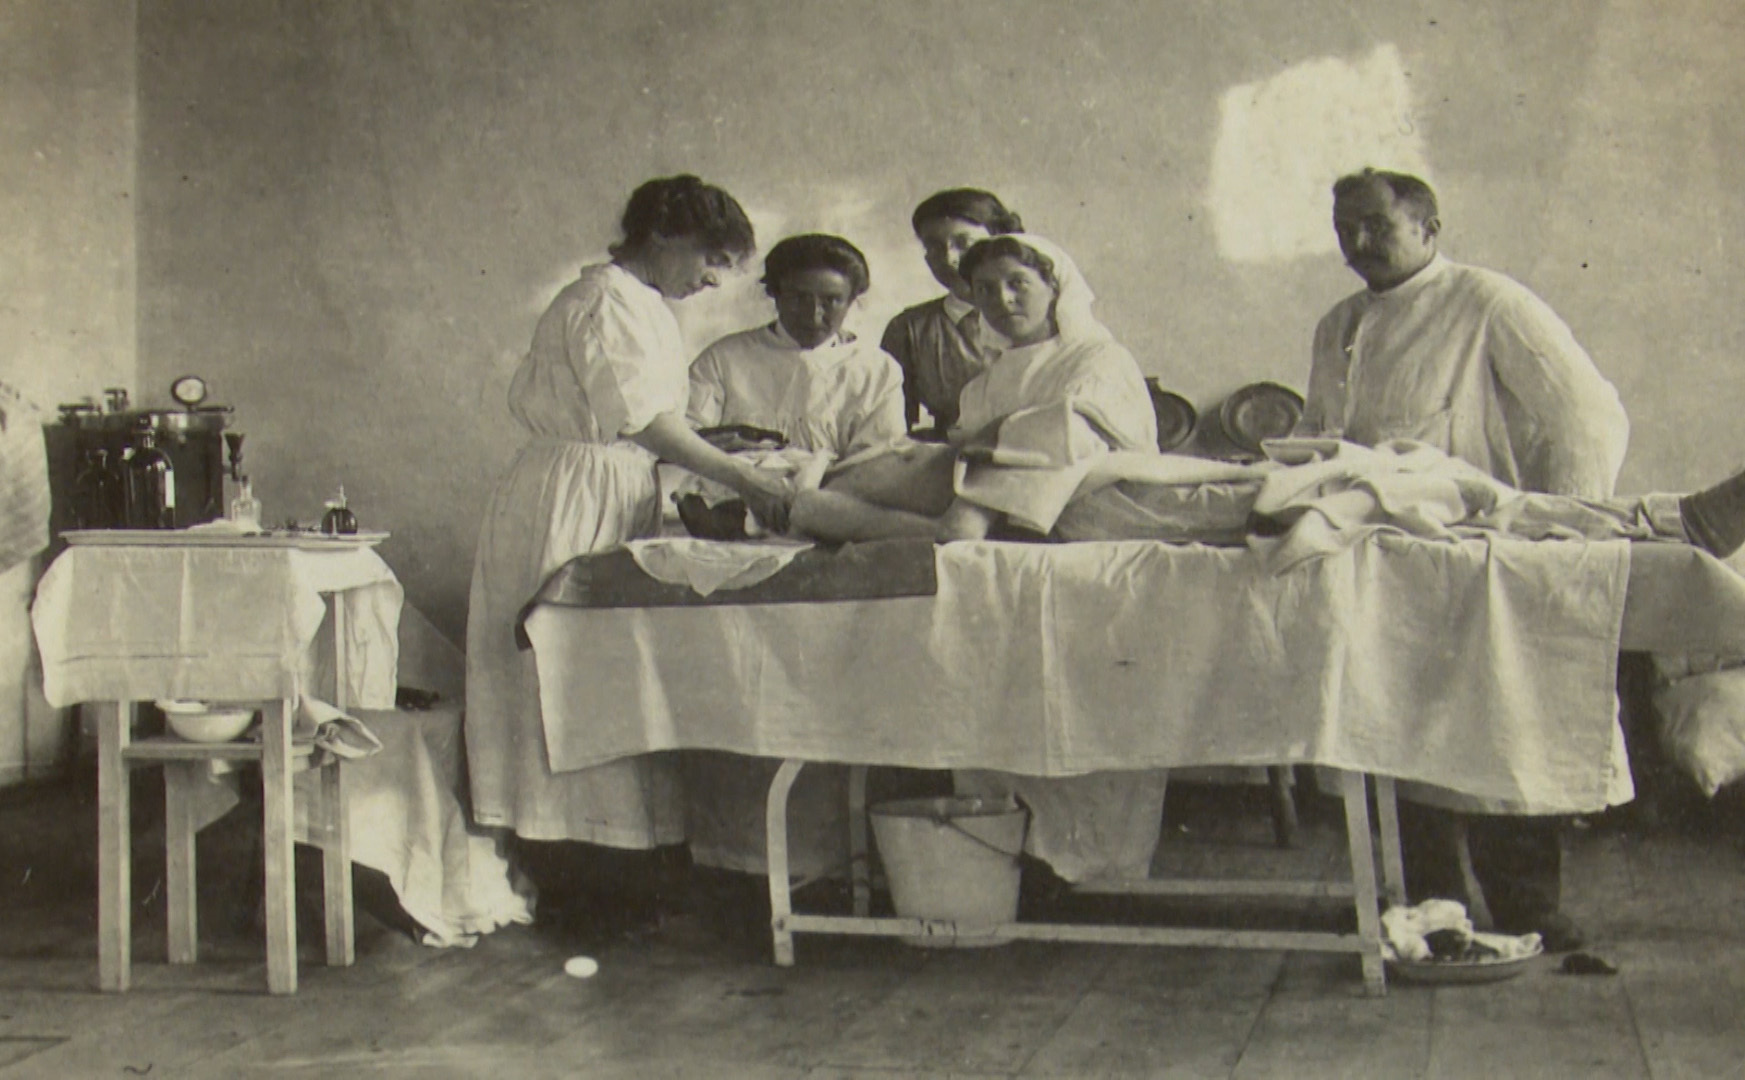 Elsie Inglis, second left, pioneering founder of Scottish Women’s Hospitals for Foreign Service, at work during WWI